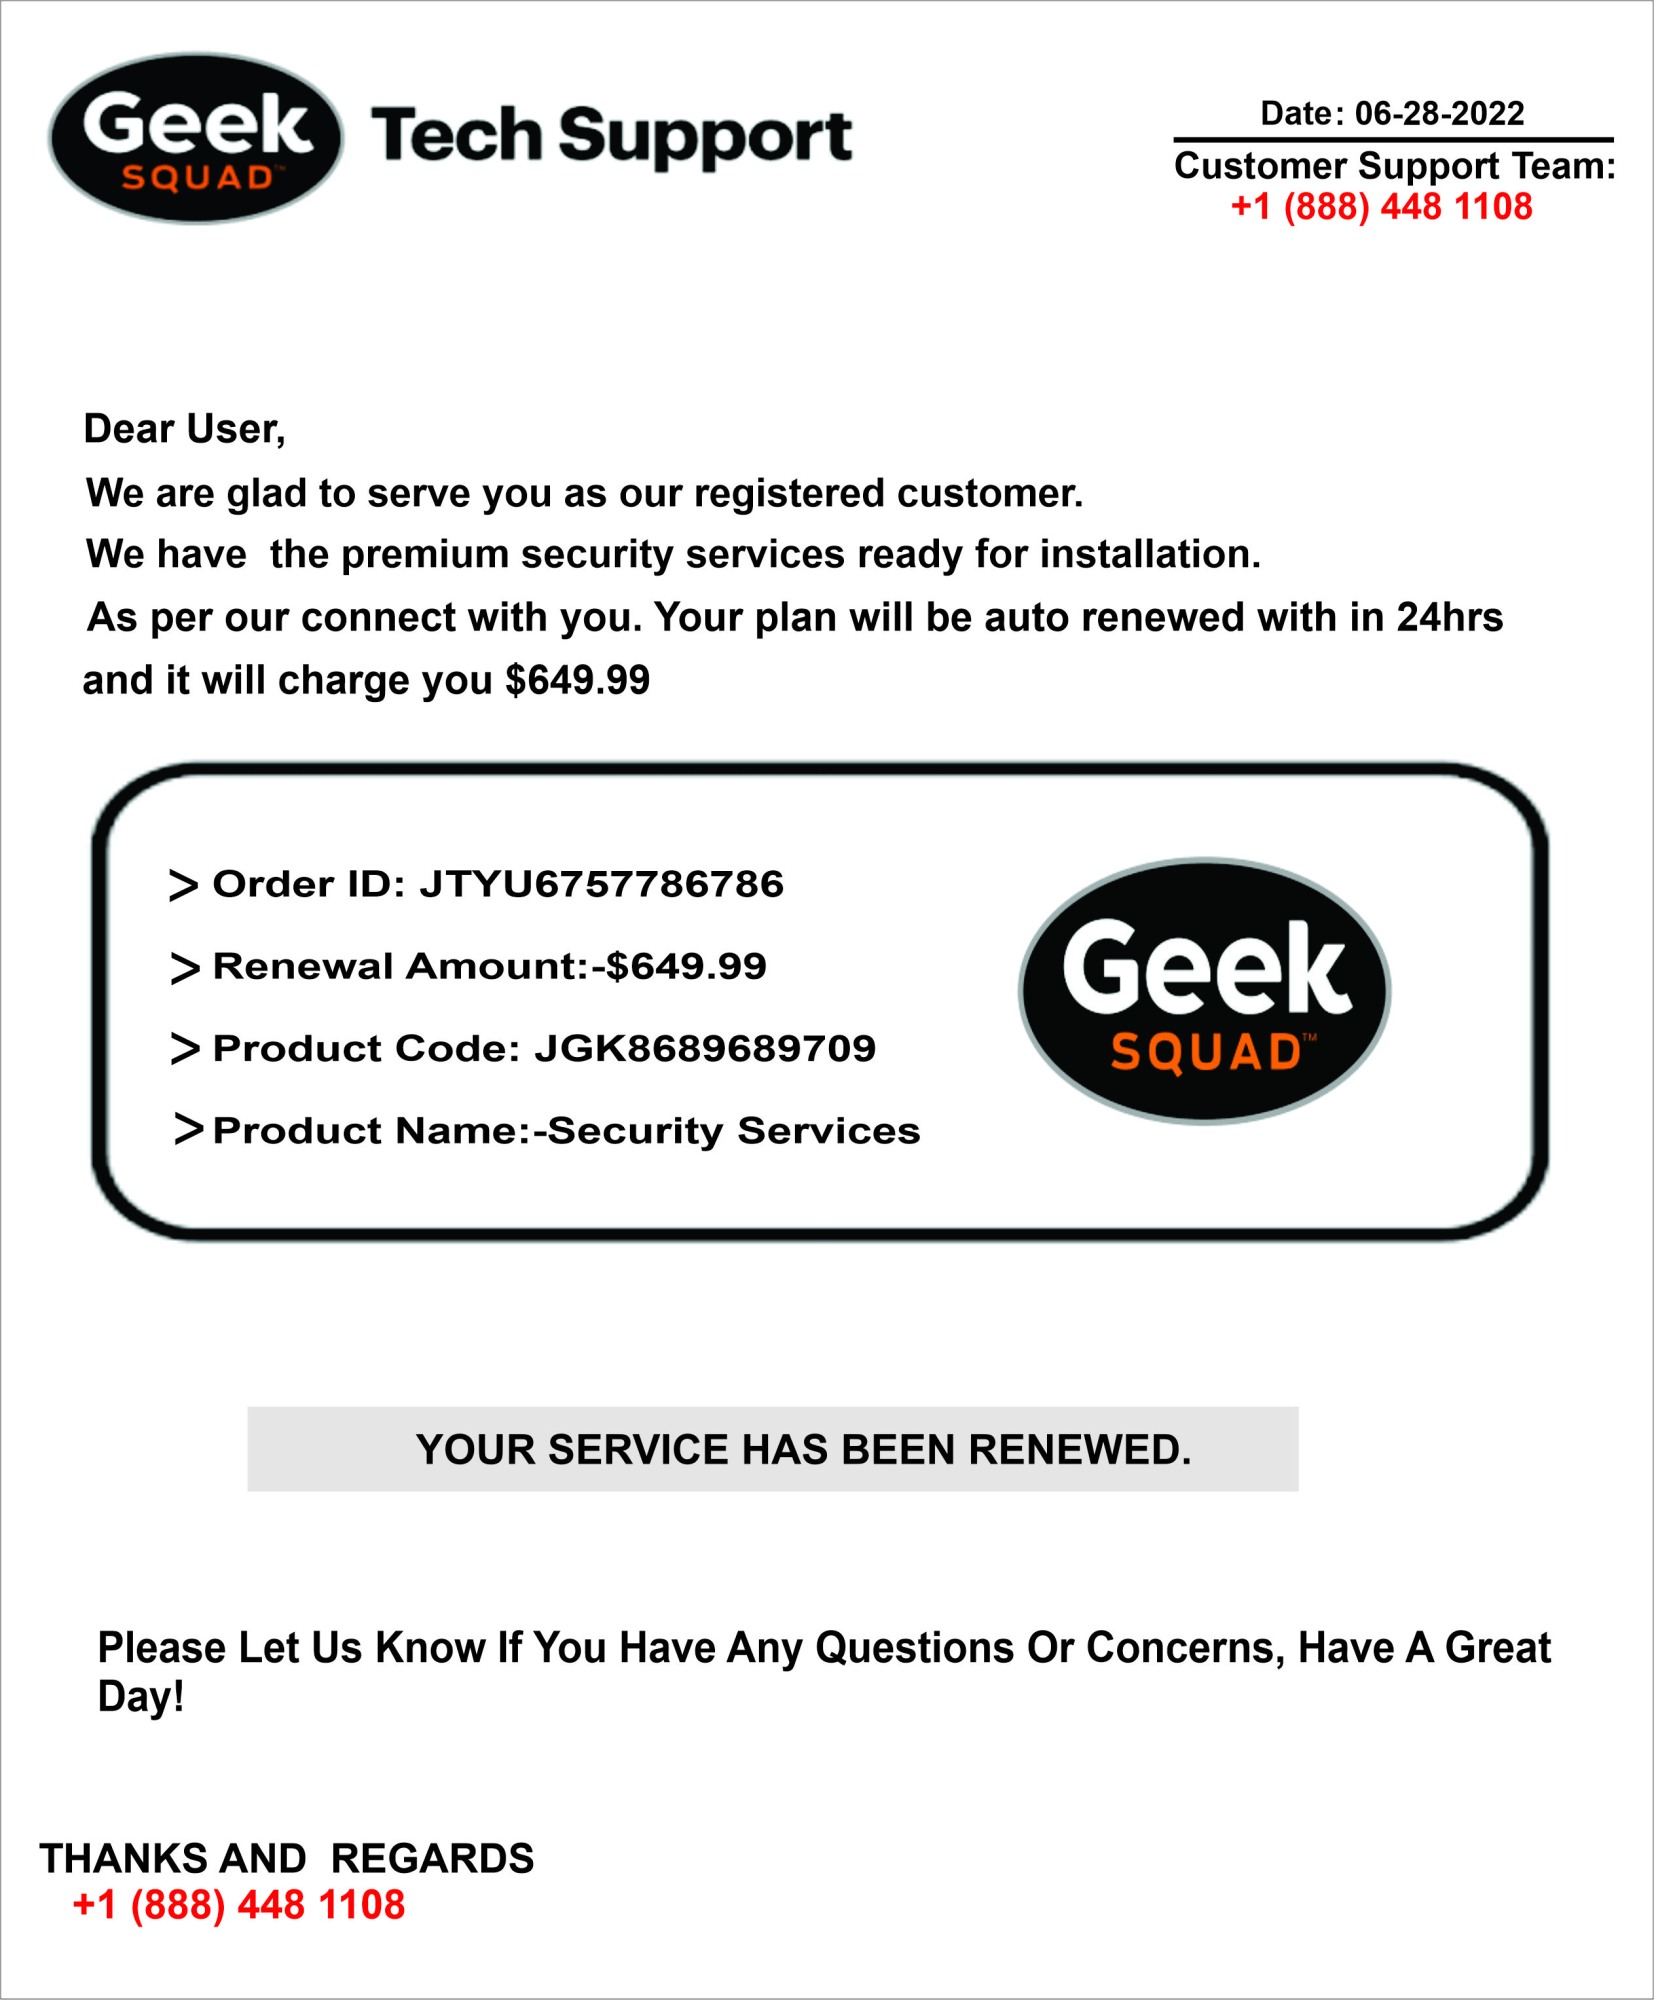 Invoice from Geek Squad Tech Support for renewal of "premium security services ready for installation." Includes an Order ID, Product Code, phone number to call with questions, and renewal amount of $649.99.